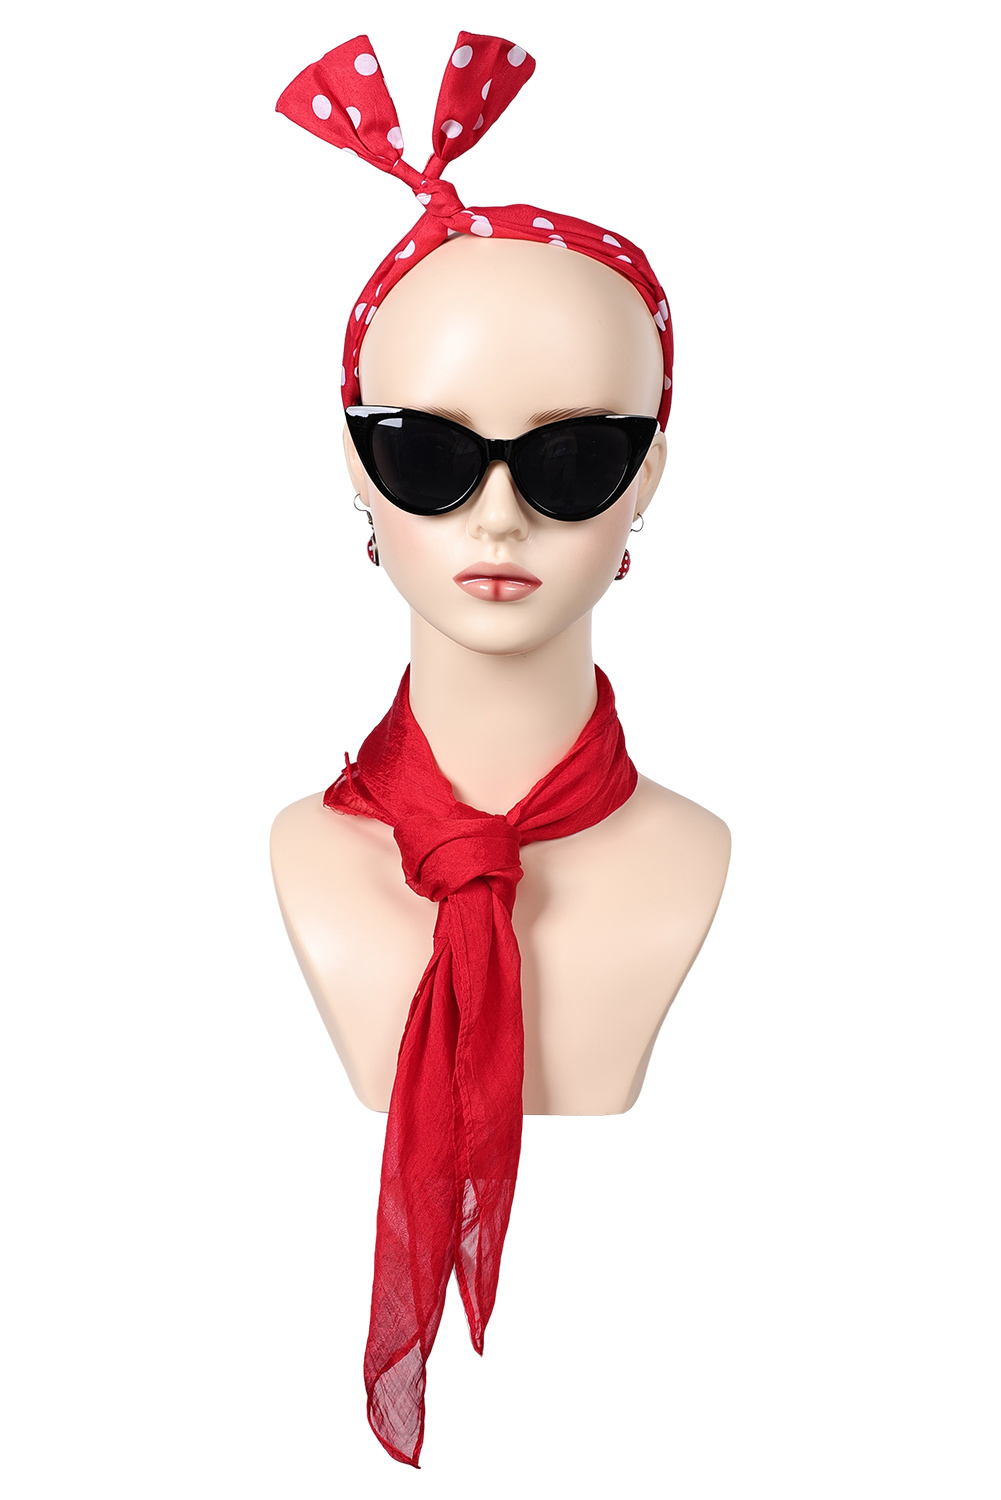 Grease: Rydell High Eforpretty 1950 's Pink Lady Cosplay Red Headband Halloween Costume Accessories